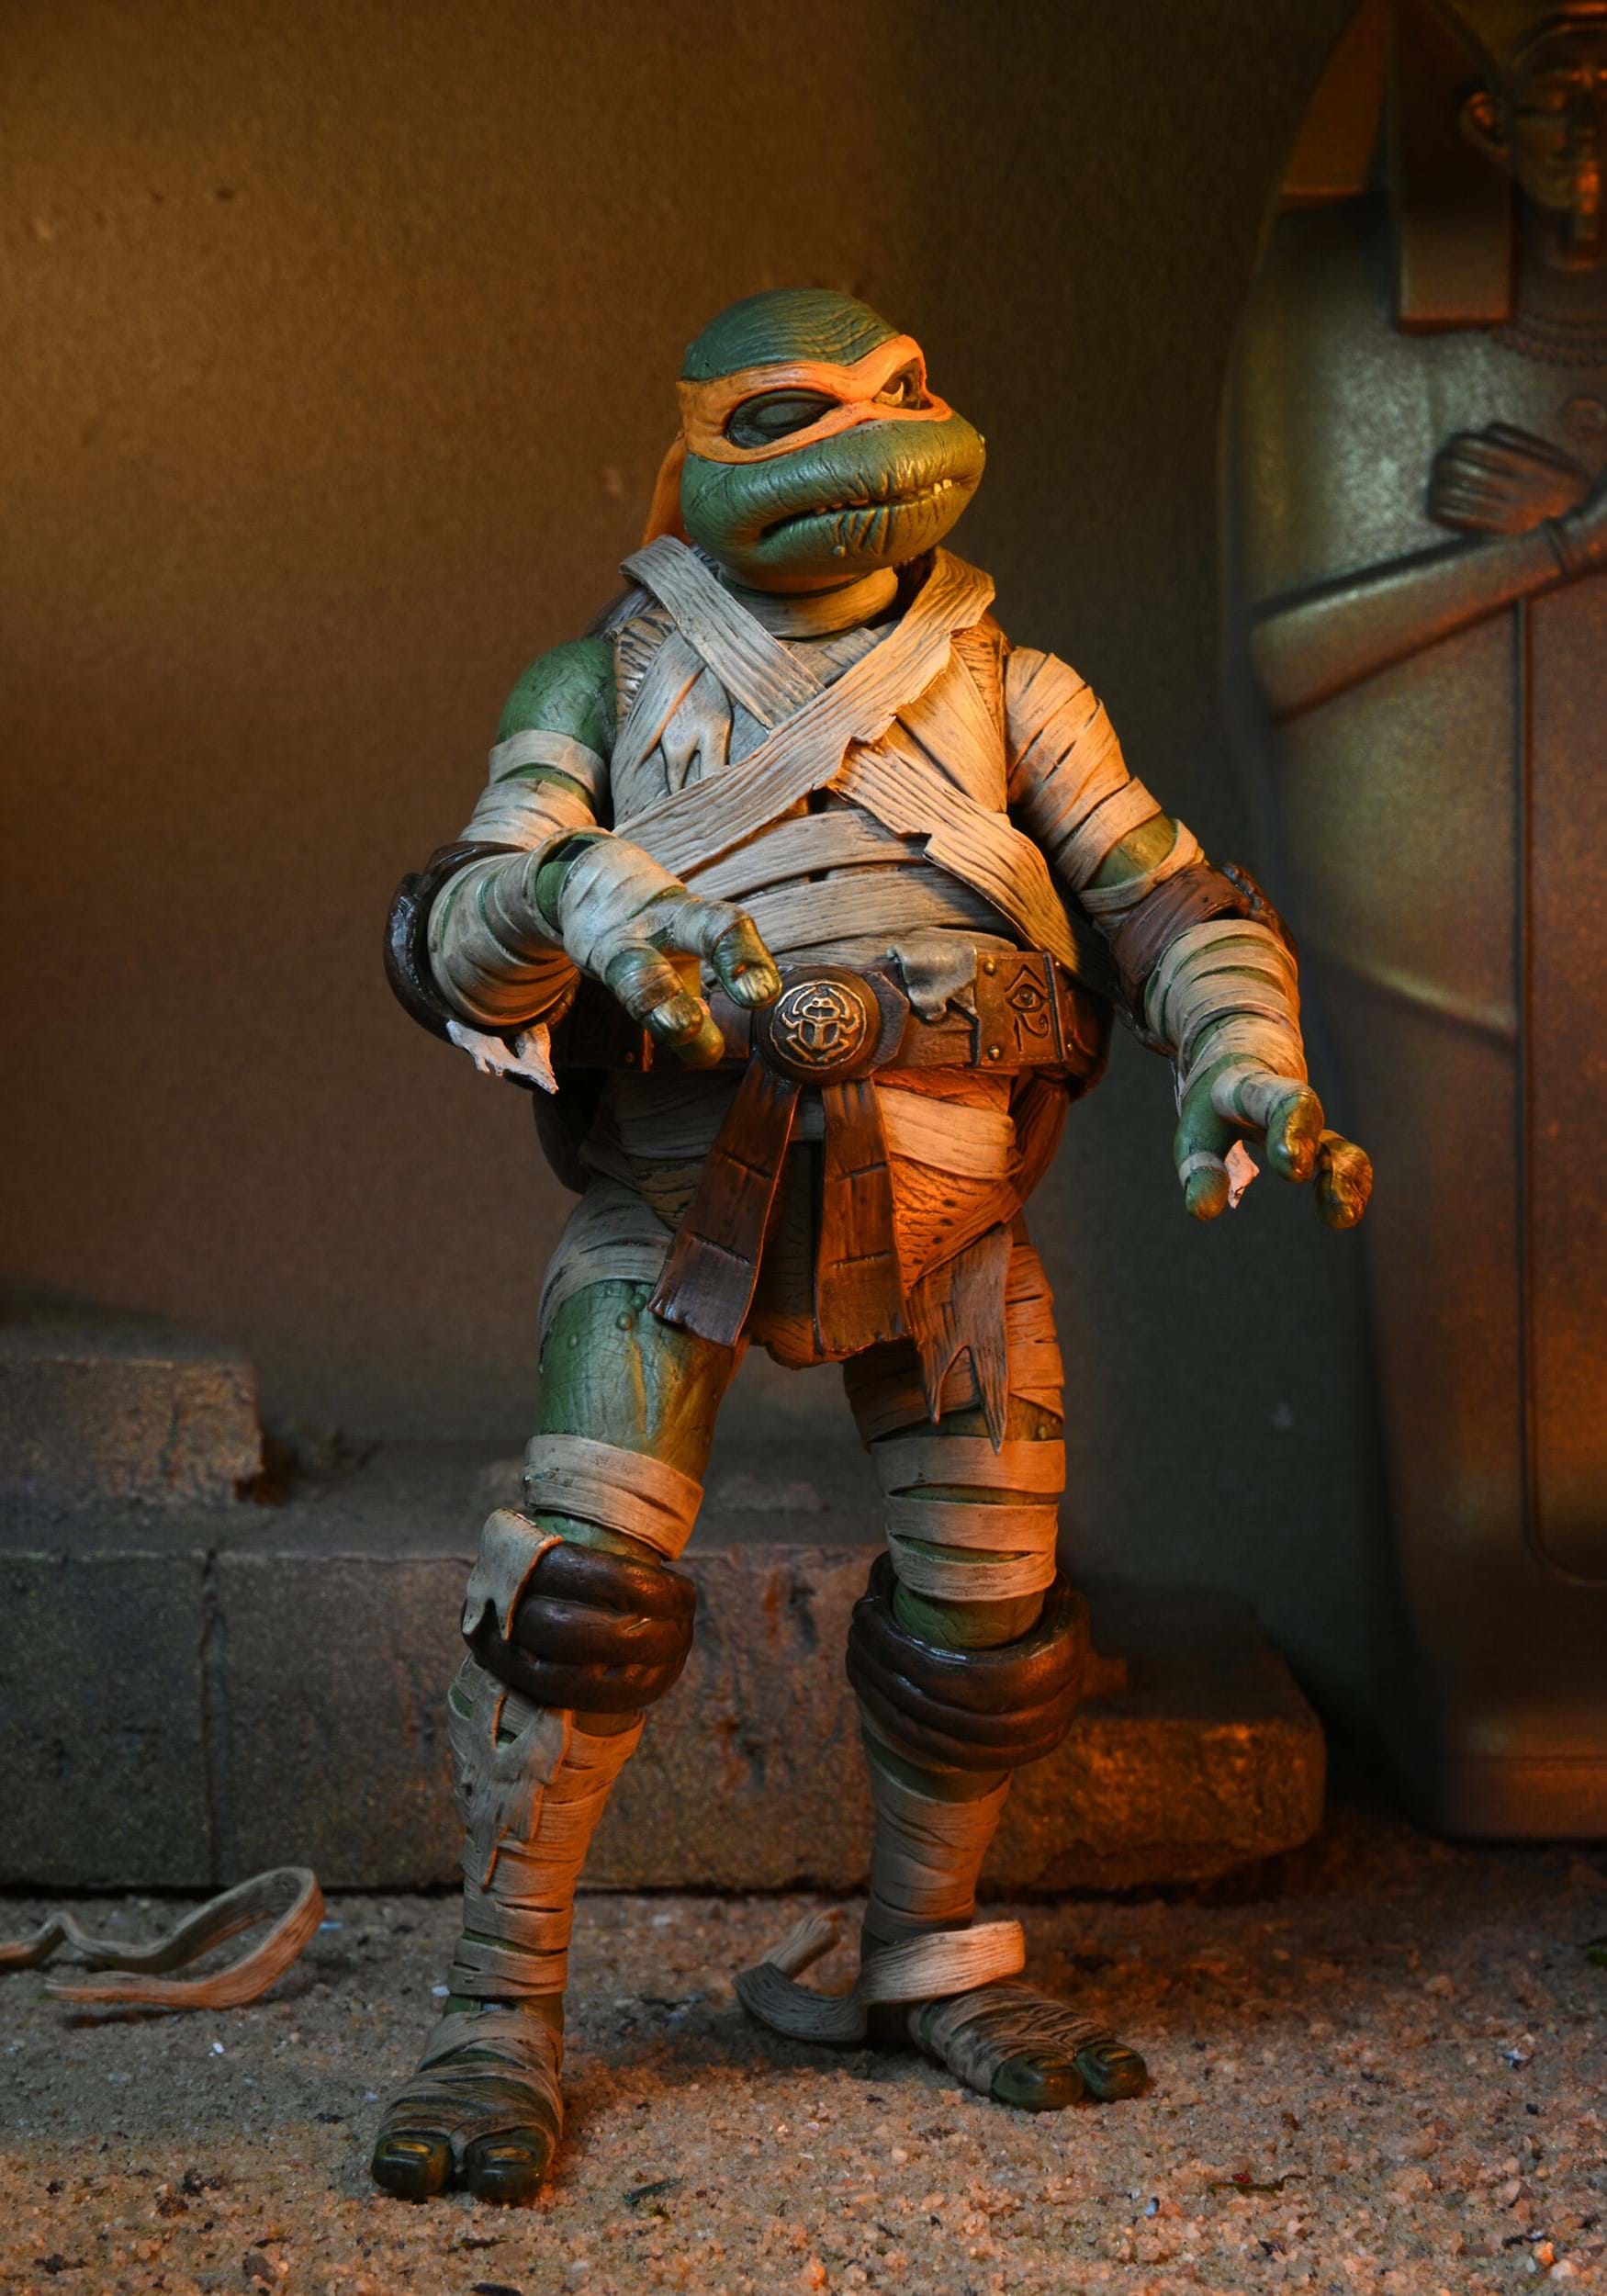 TMNT X Universal Monsters Michelangelo As The Mummy